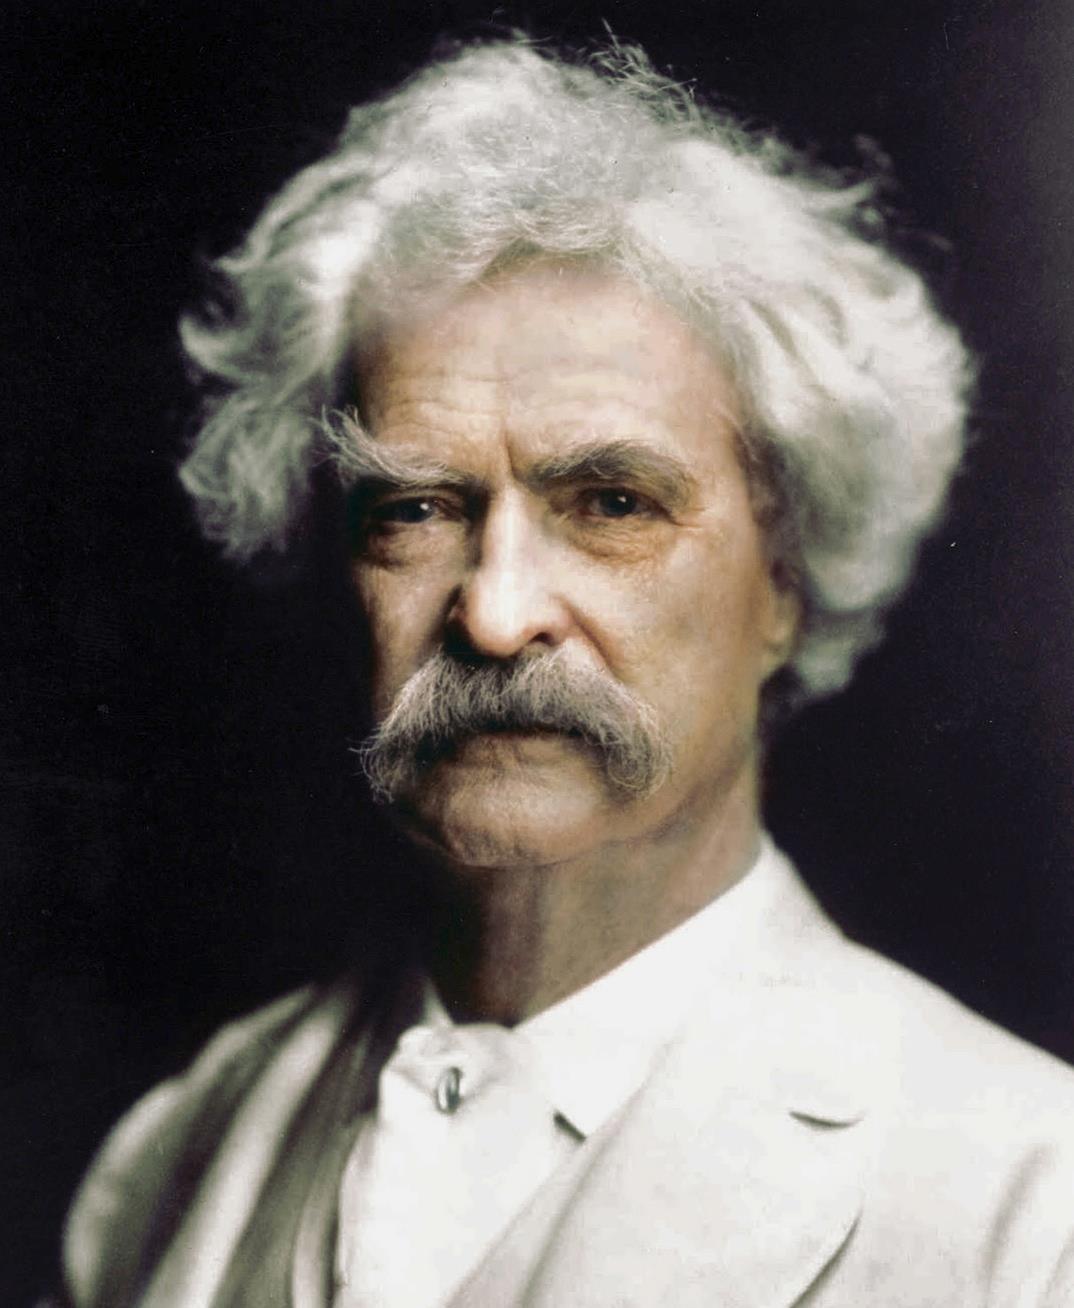 Mark Twain - "I can write anything I want on paper and people will buy it."